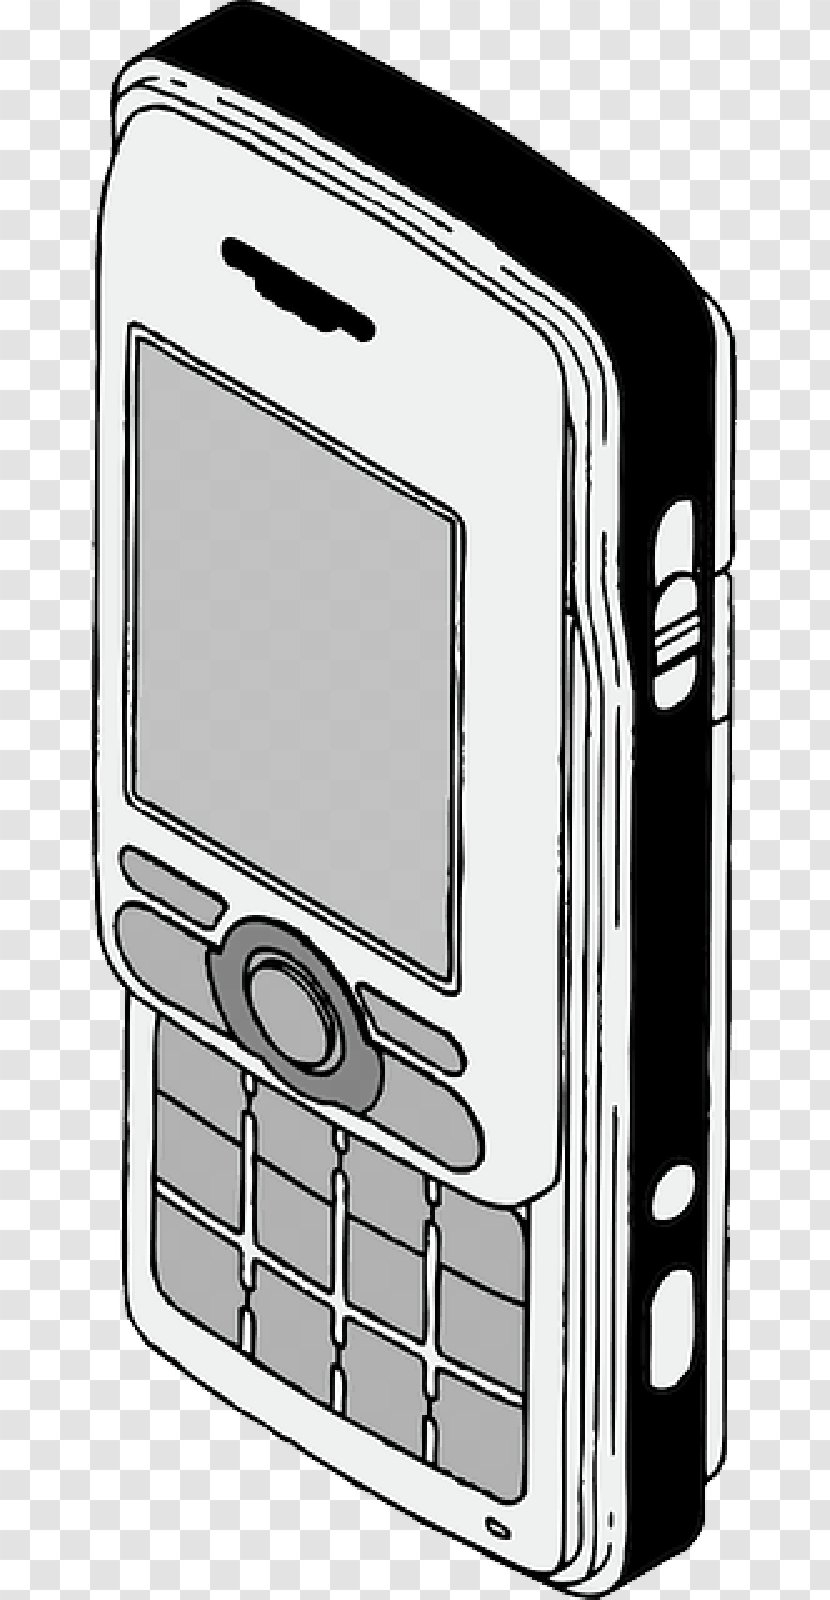 Clip Art Drawing Telephone Image Rescue Cell Phone - Call - Bar Transparent PNG